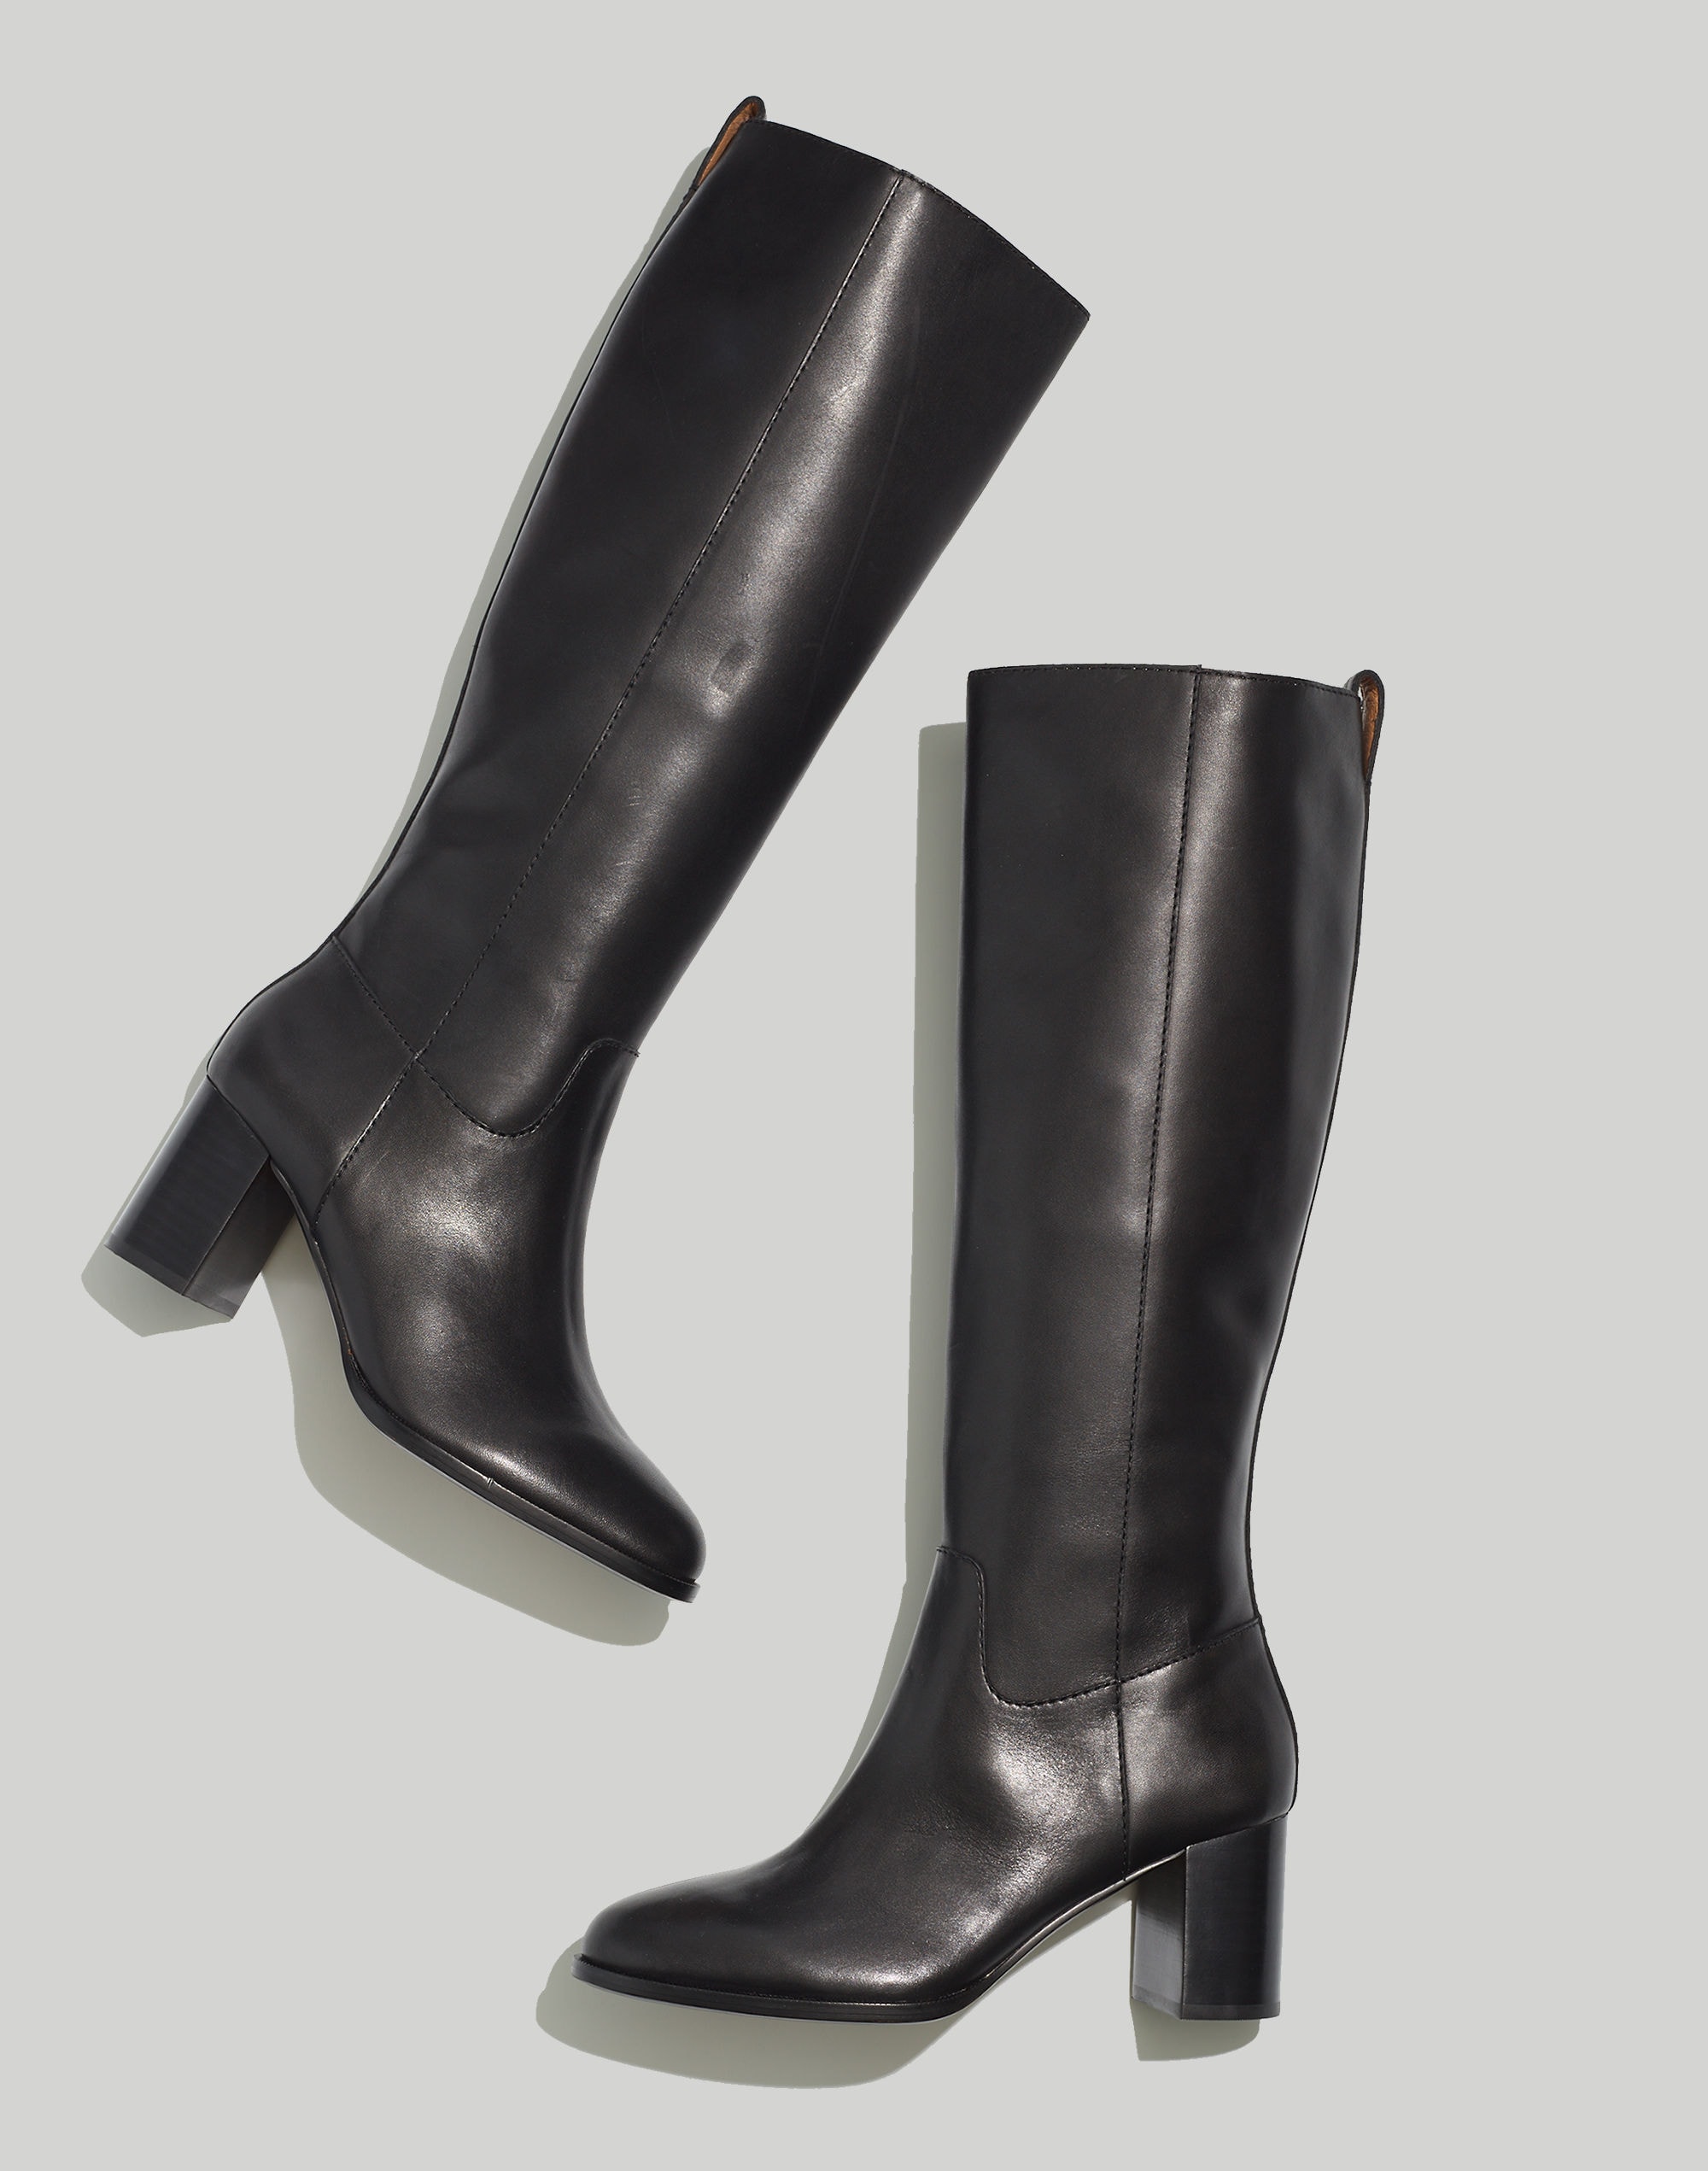 The Selina Tall Boot